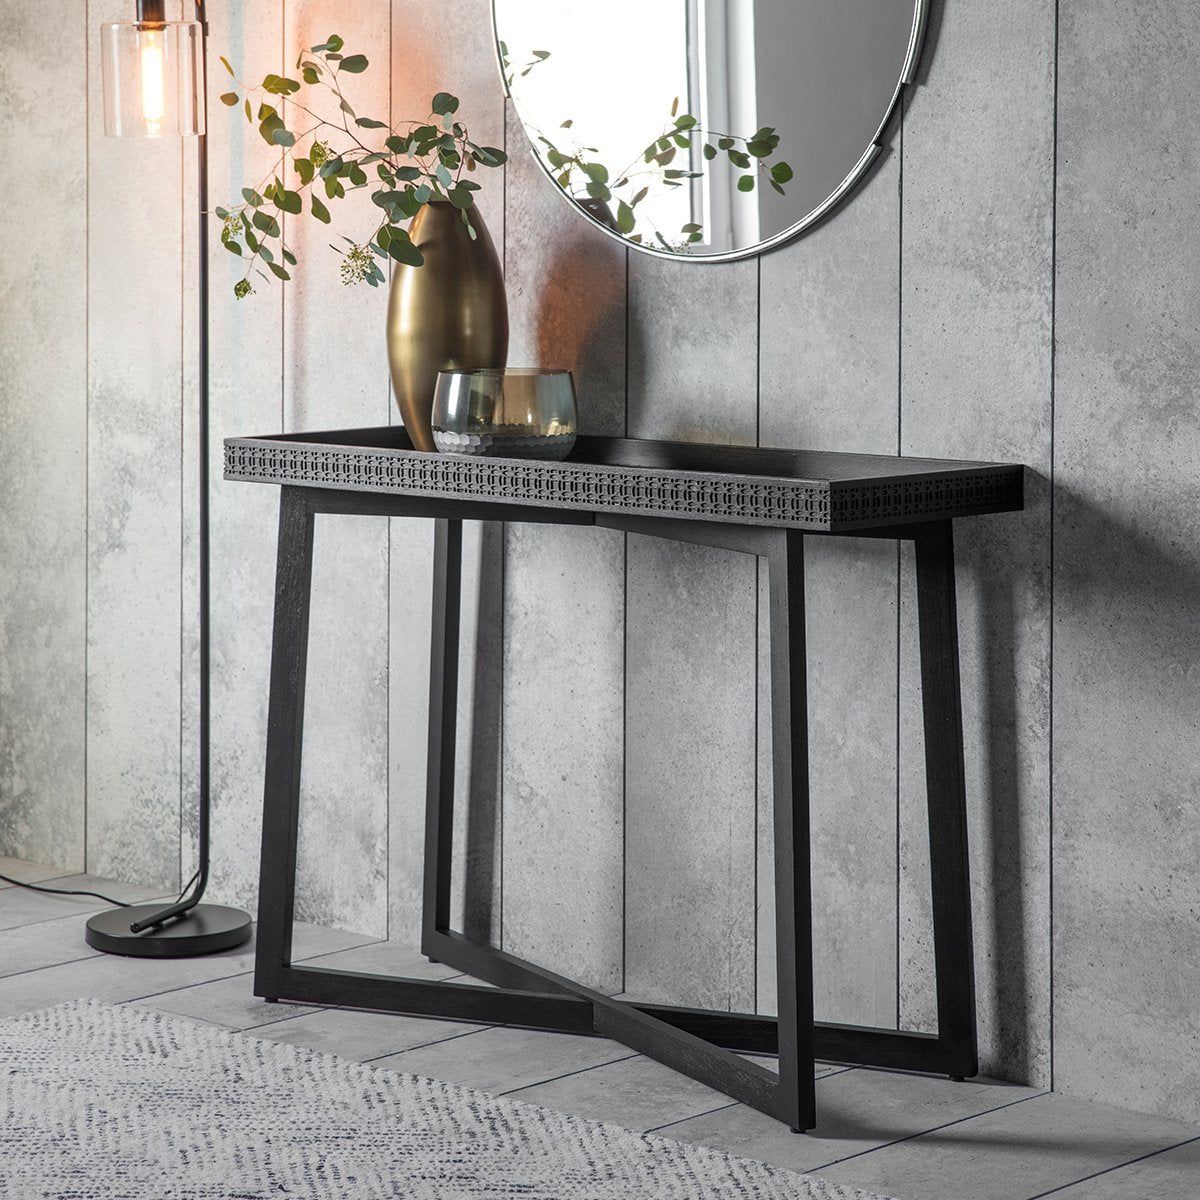 Gallery Direct Boho Boutique Console Table Outlet